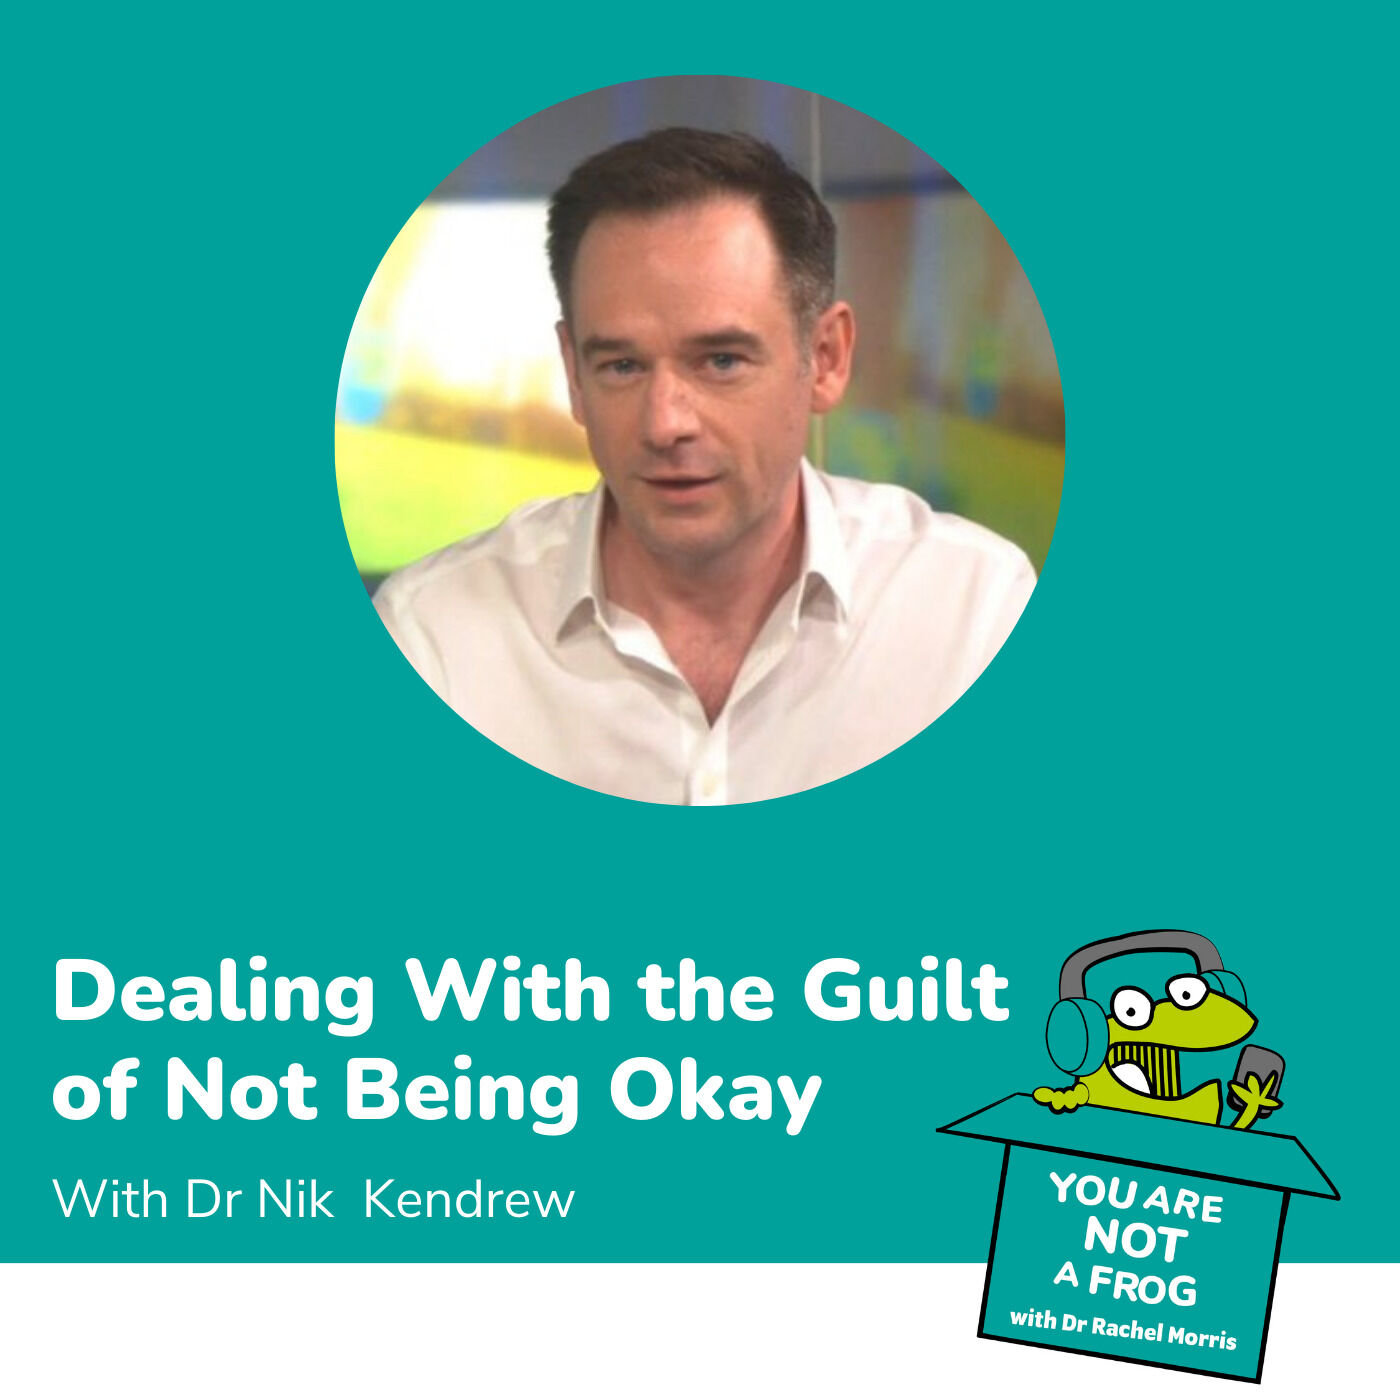 Dealing With the Guilt of Not Being Okay